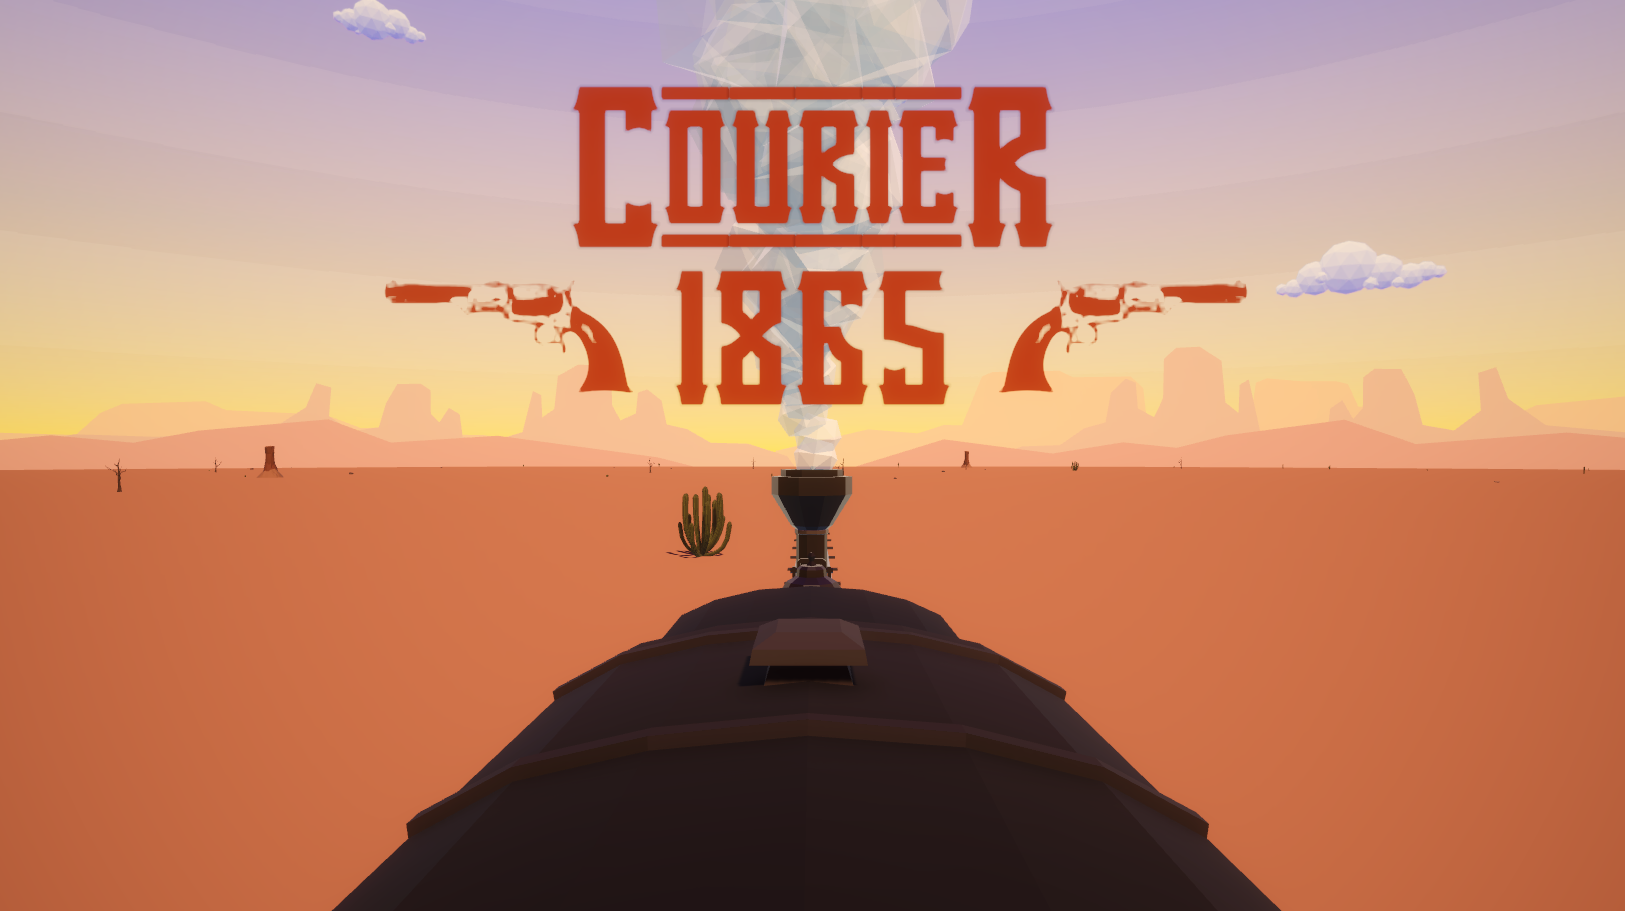 Courier 1865